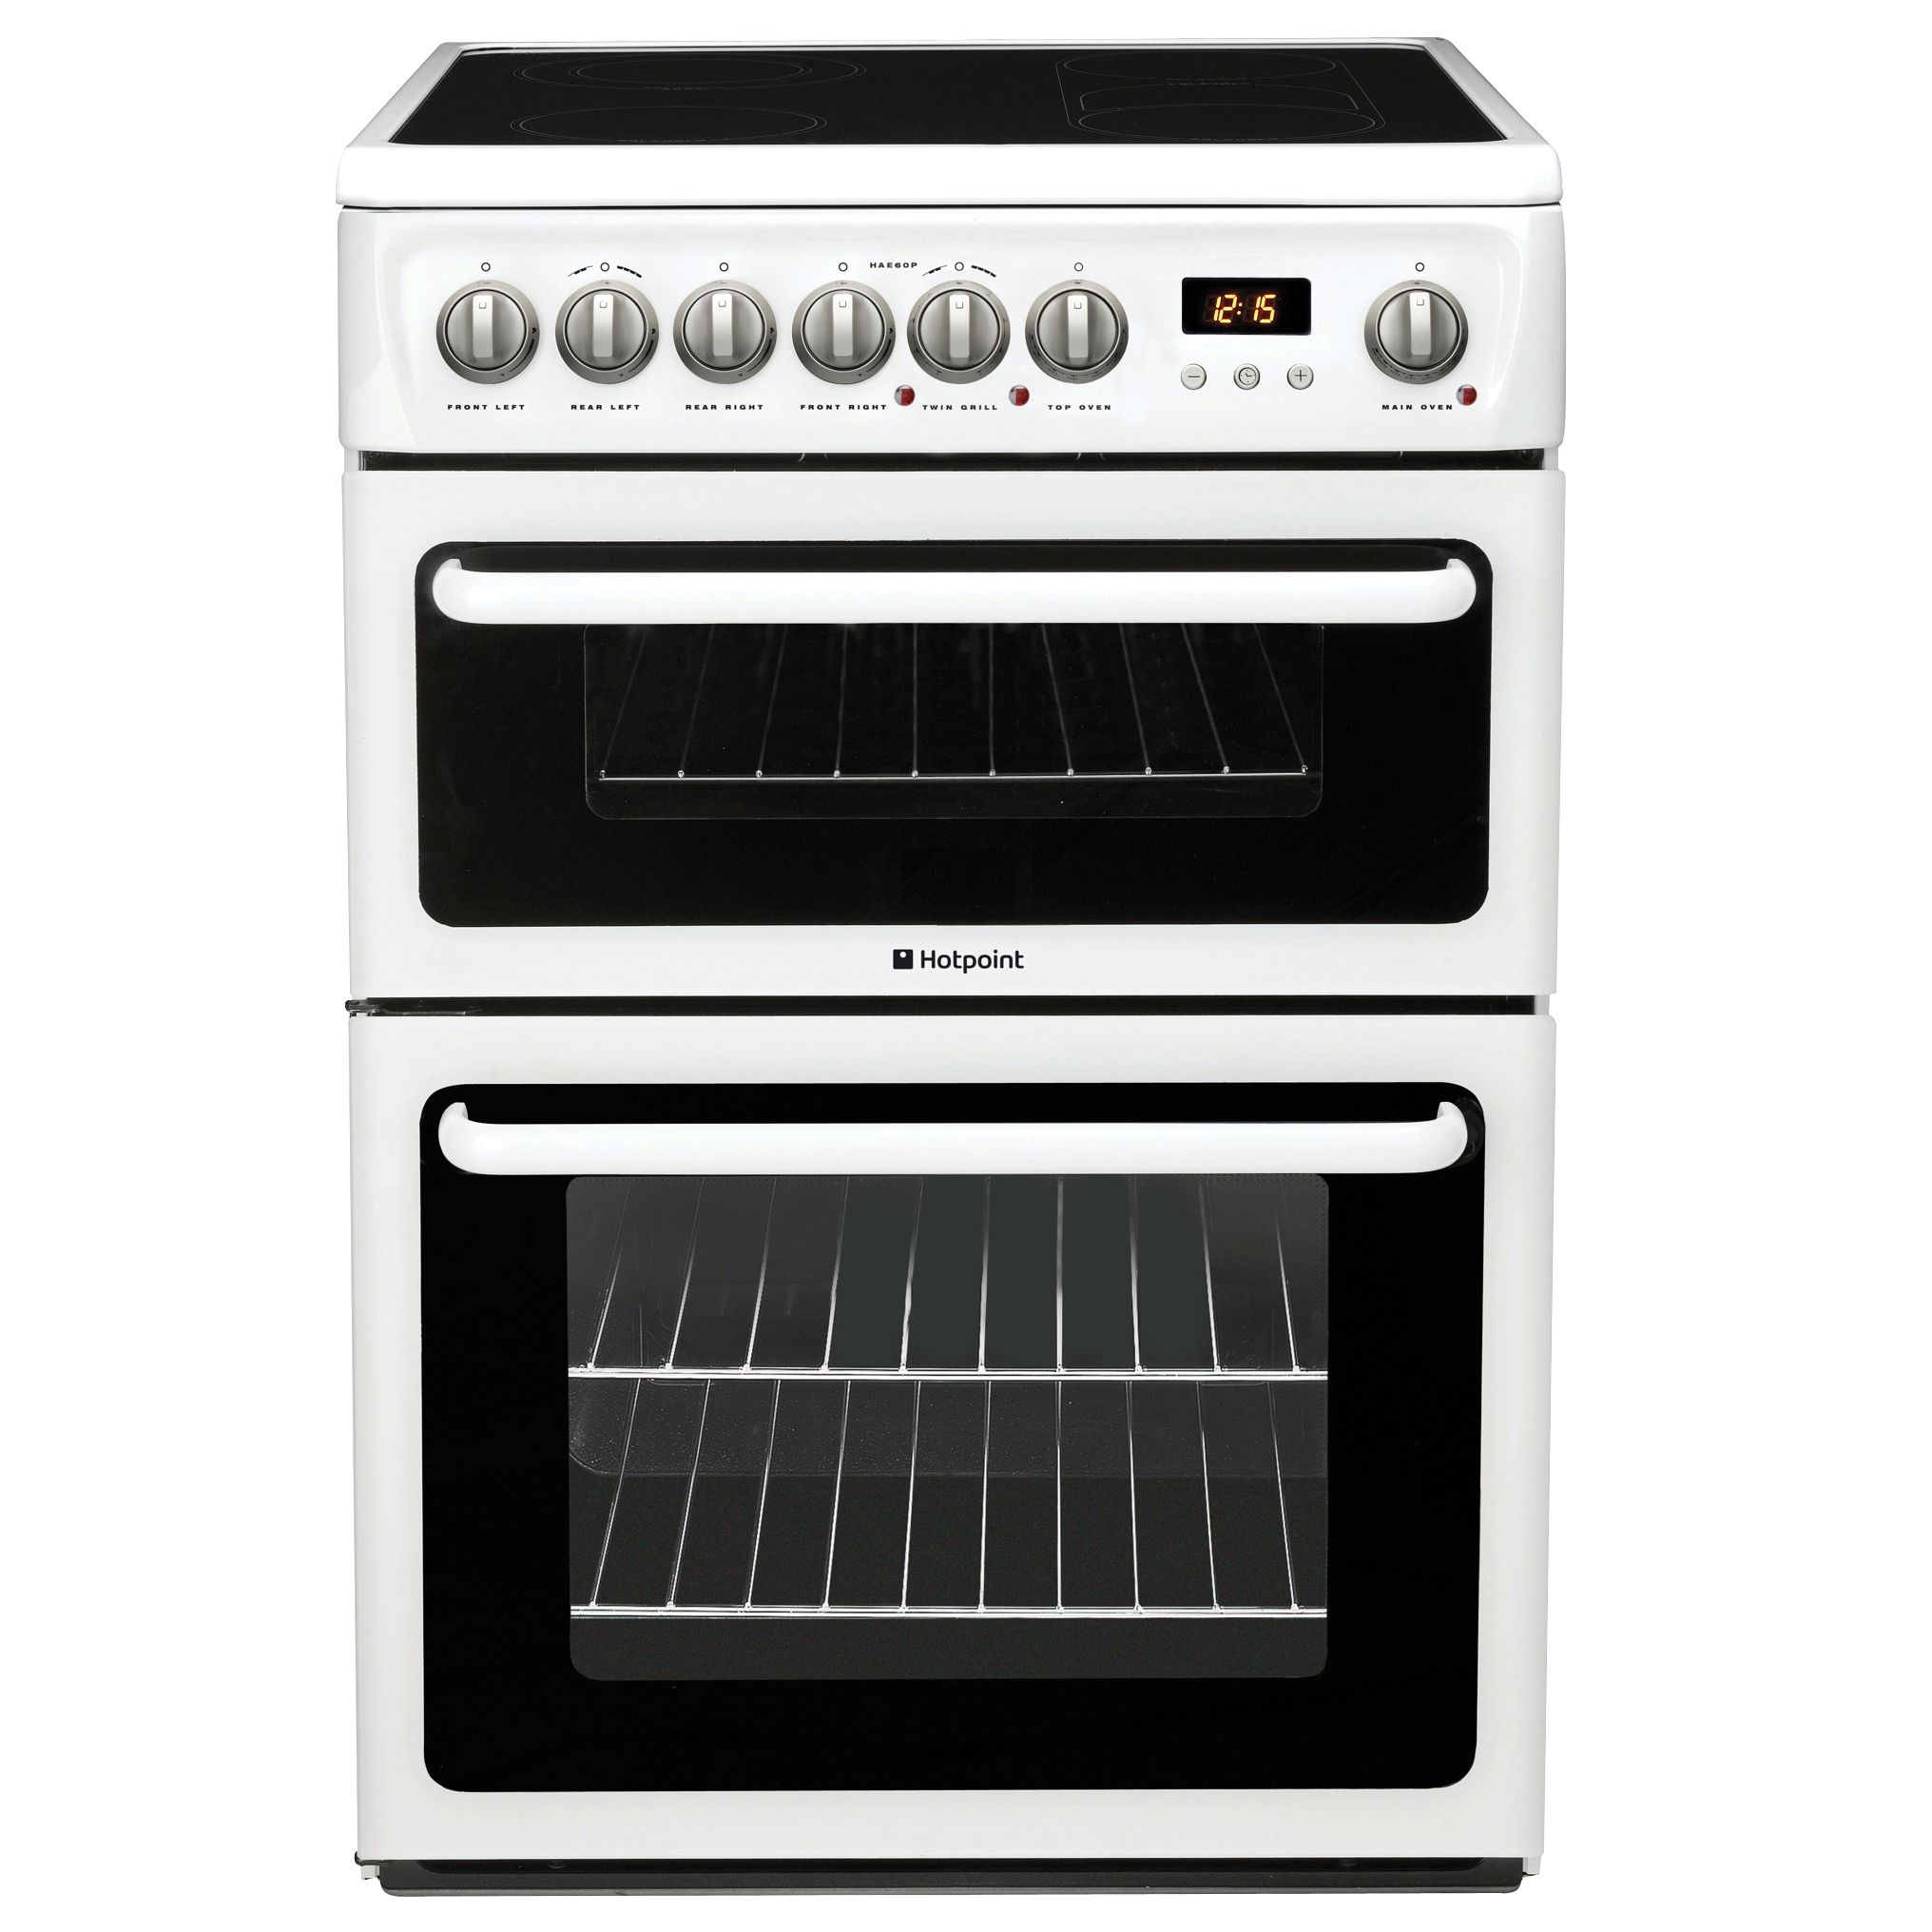 Hotpoint HAE60P Electric Cooker, White at John Lewis